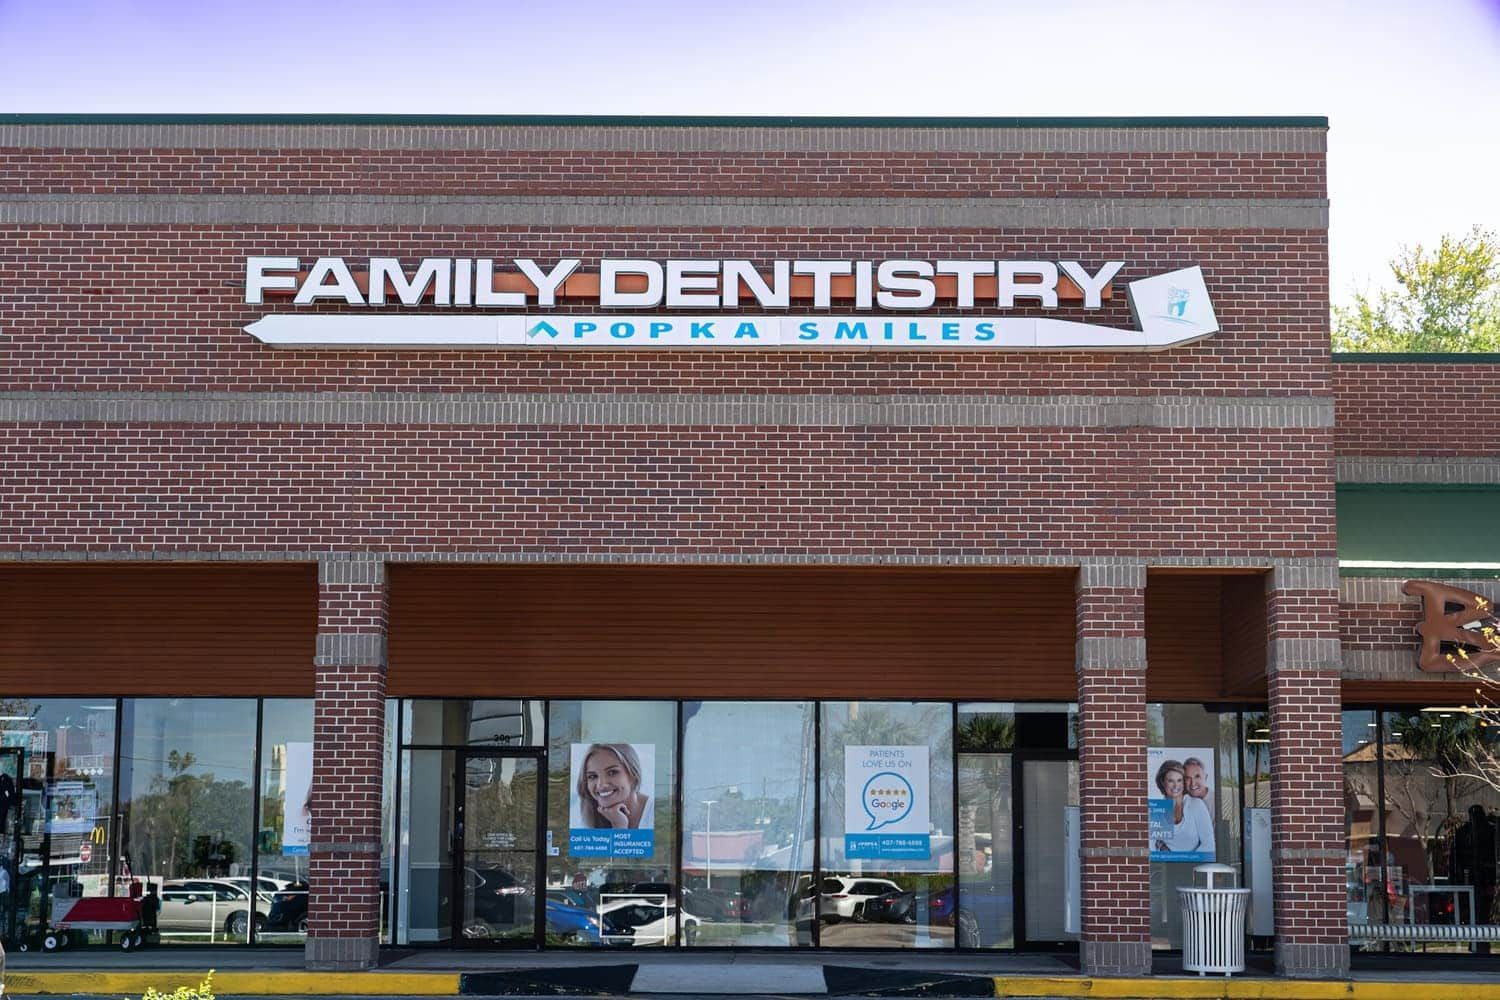 A brick building with a sign that says family dentistry